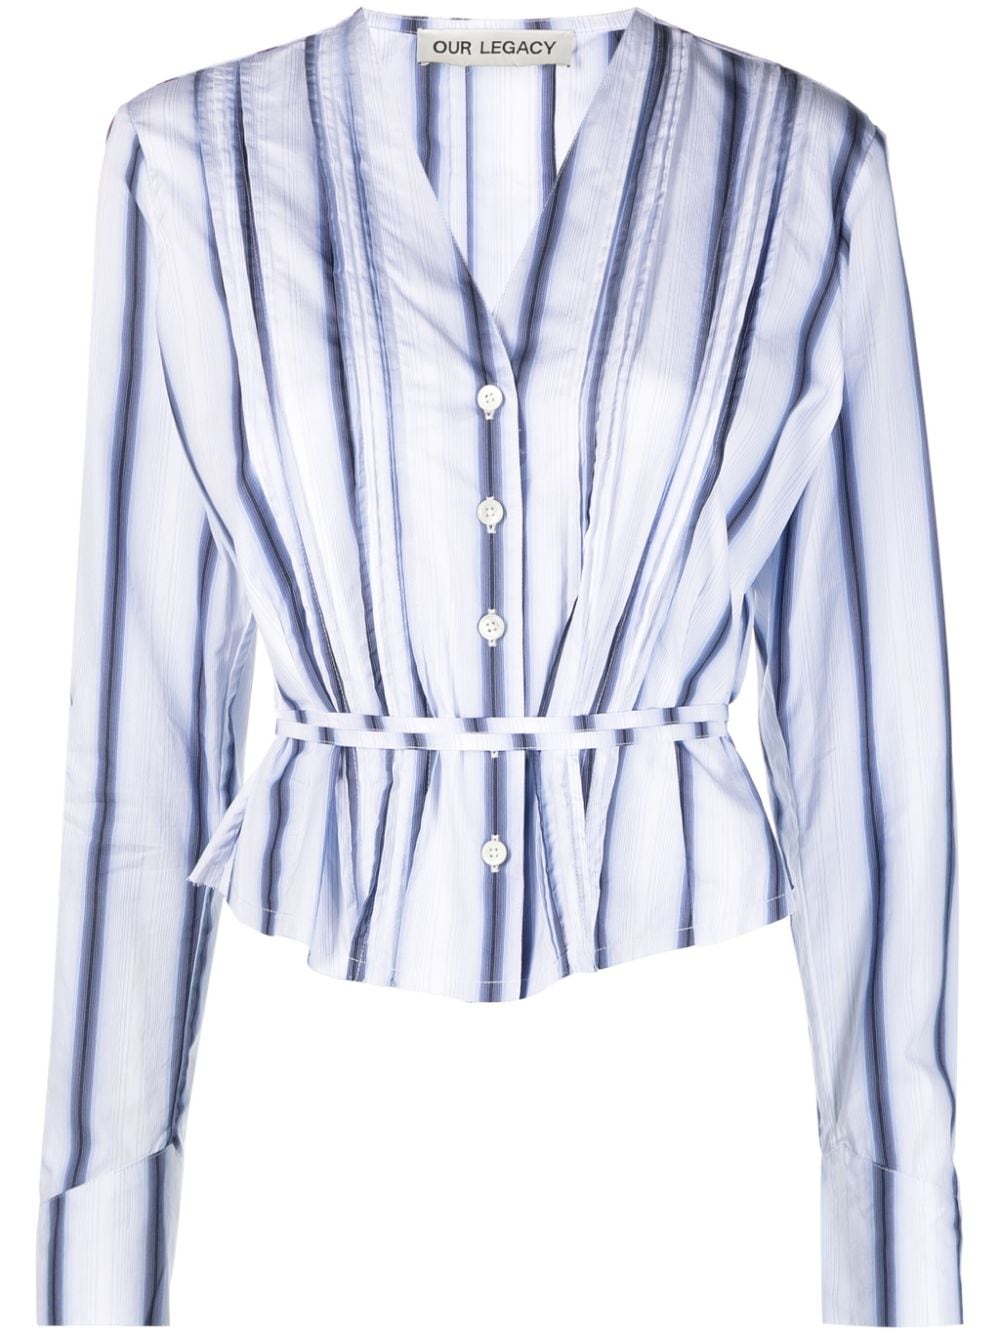 OUR LEGACY Gestreepte blouse Blauw